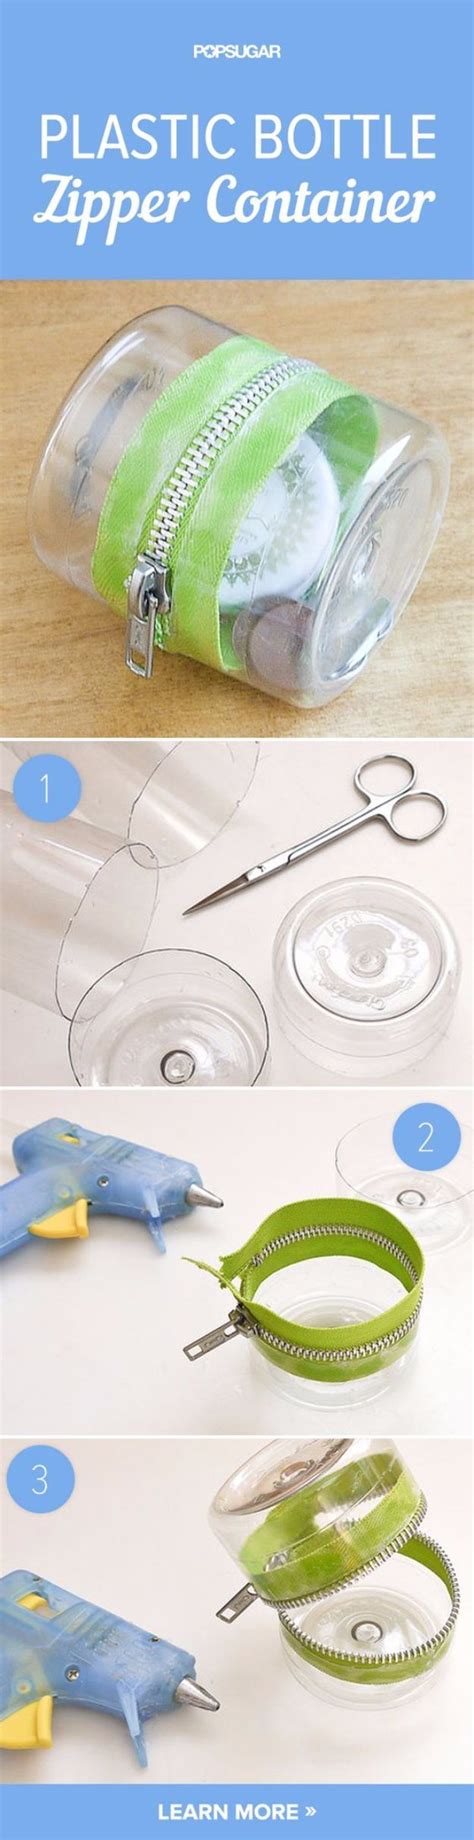 16 Unbelievably Simple Diy Plastic Bottle Projects Youll Do Right Away